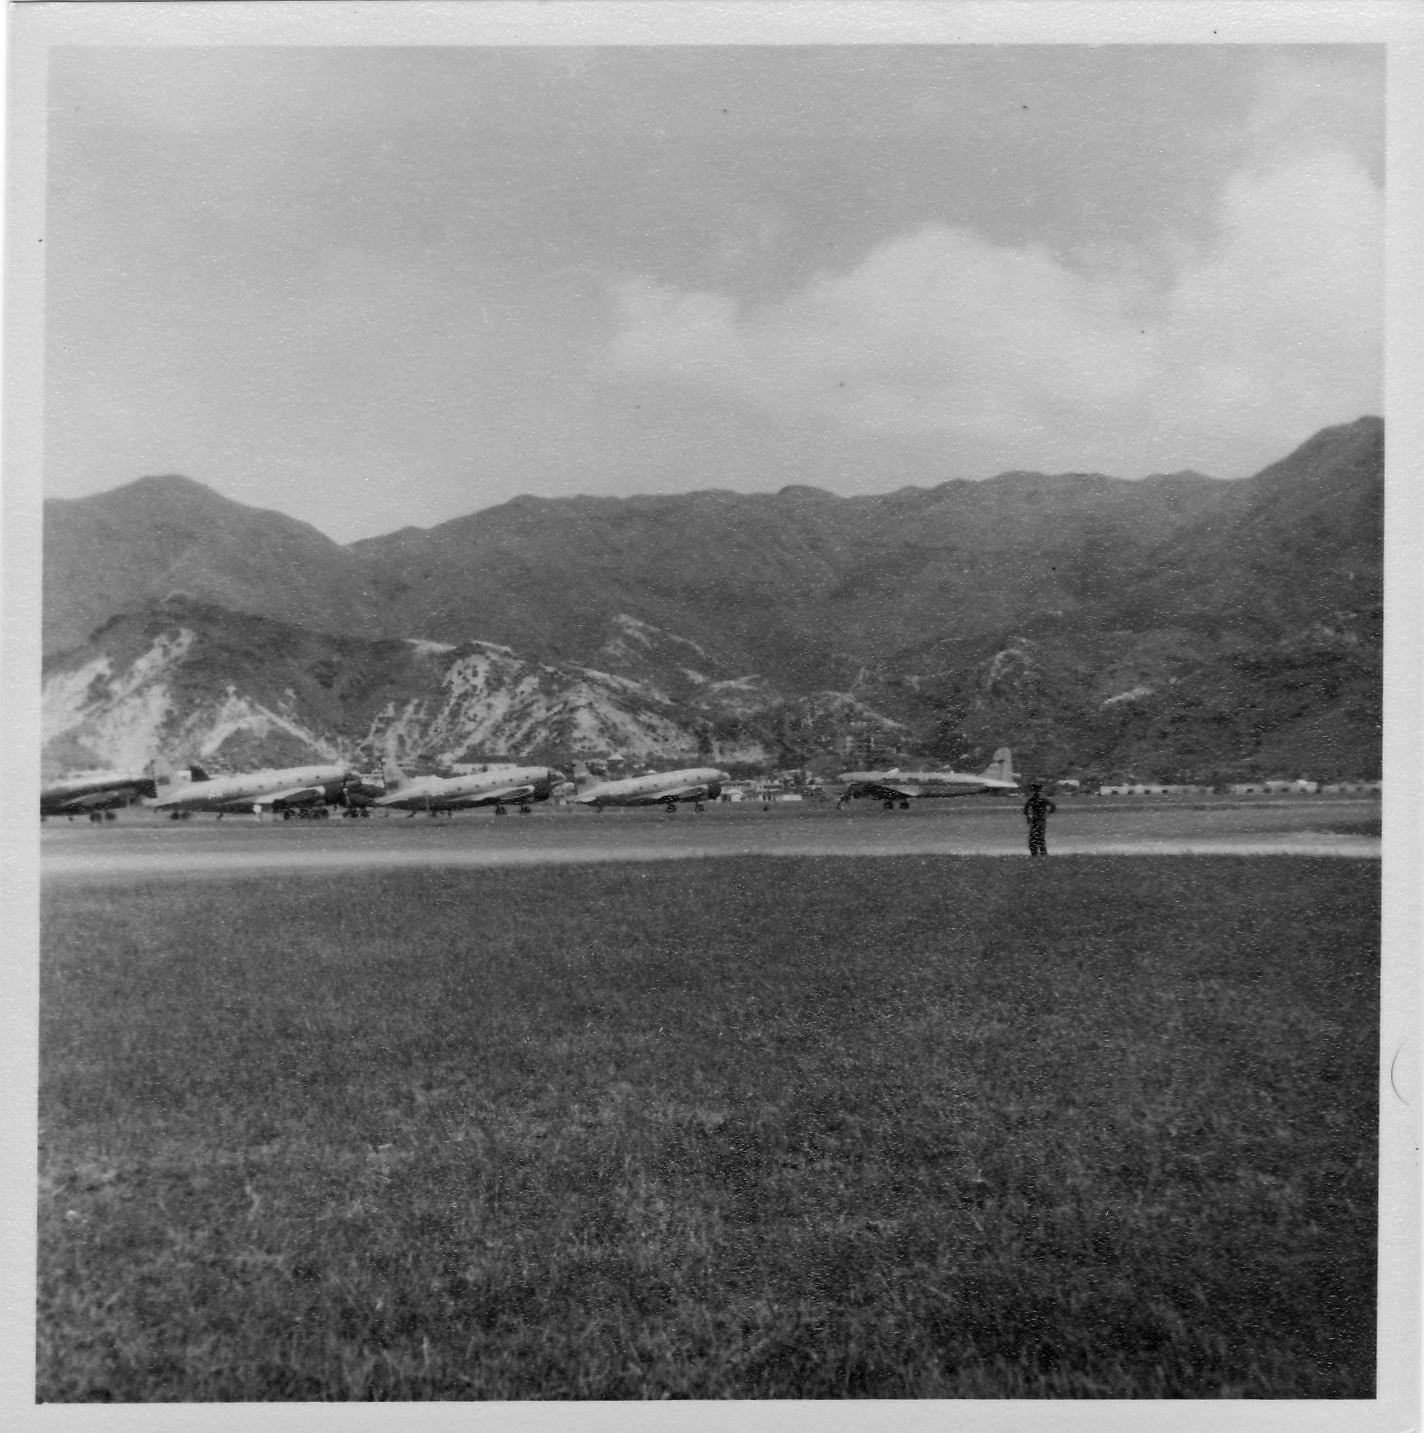 Disputed planes grounded at Kai Tak, 1950